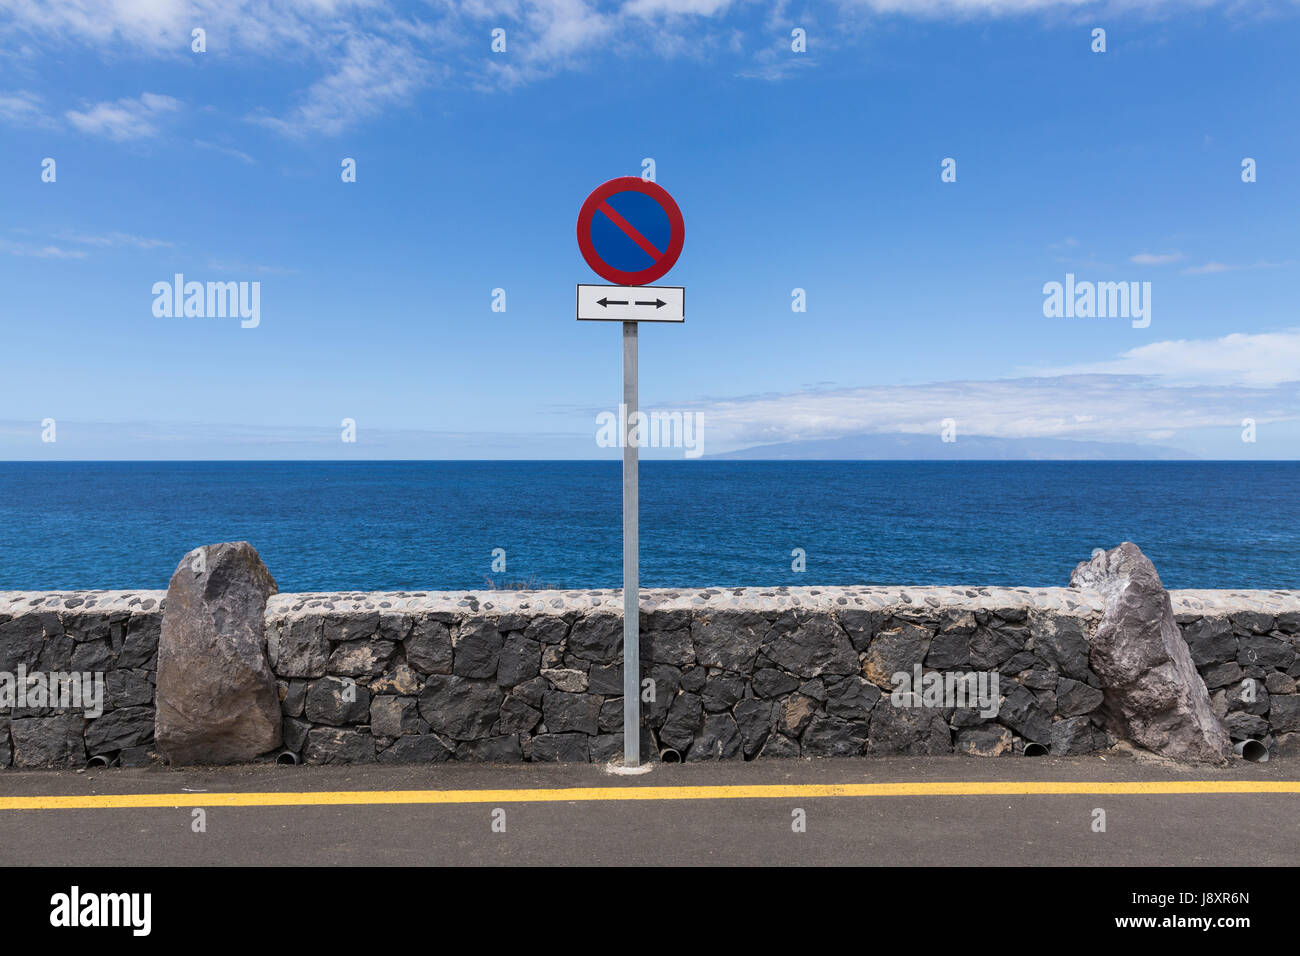 Yellow line on road and No parking sign next to natural stone wall at the coast with the atlantic ocean and the island of La Gomera in the background, Stock Photo